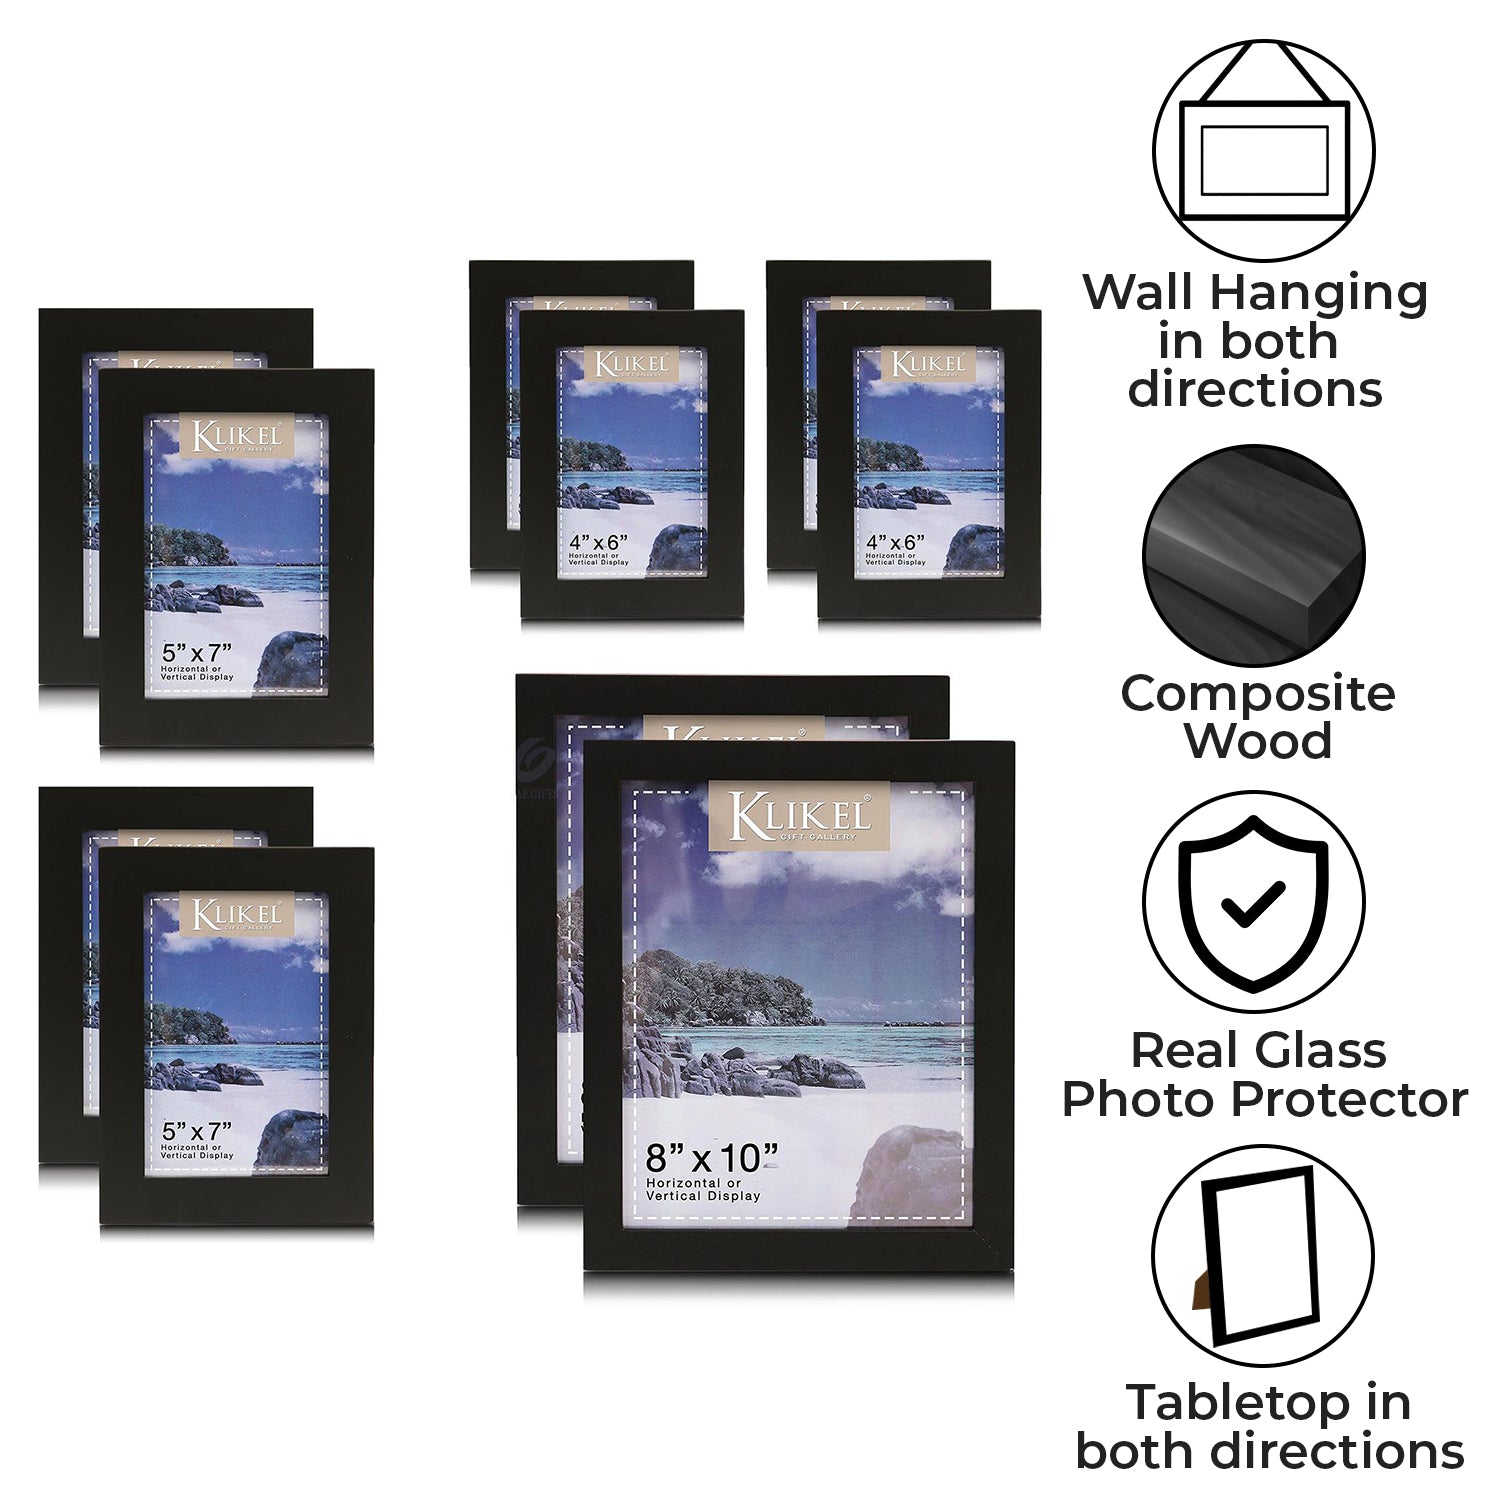 Multi Photo Picture Frame Holds 6 6x4 Photos in a Black Wood Frame